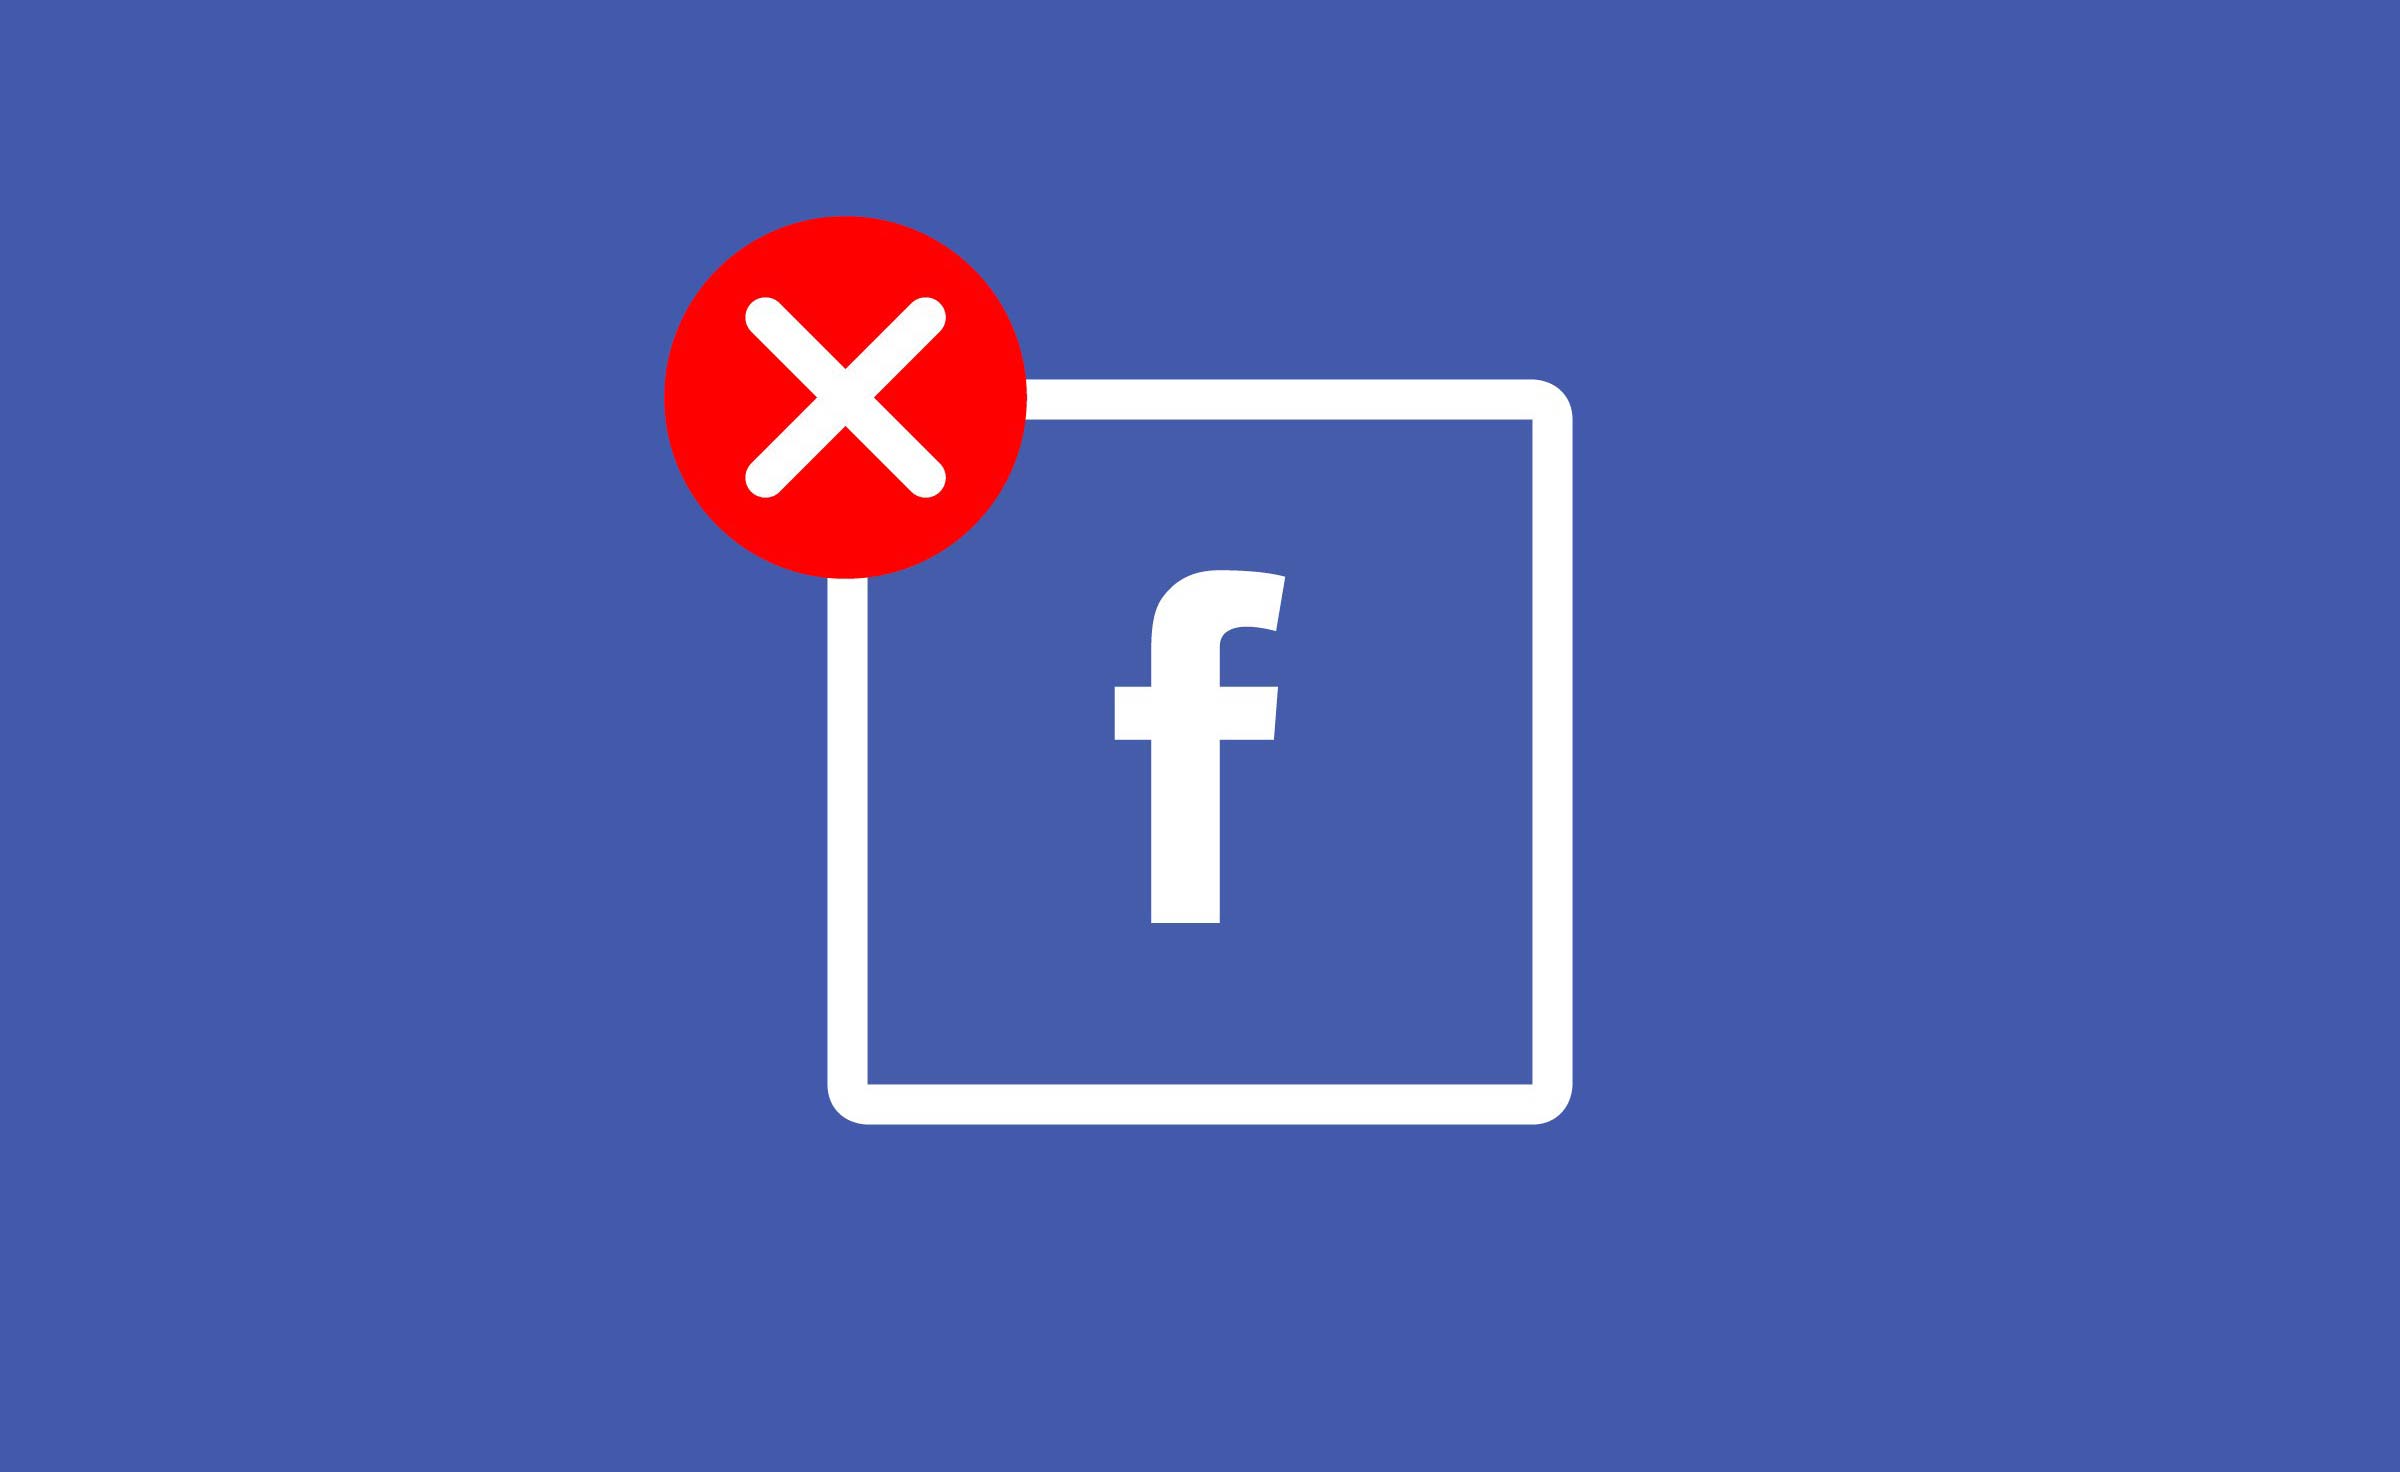 How to Fix Content Not Available Facebook Error?